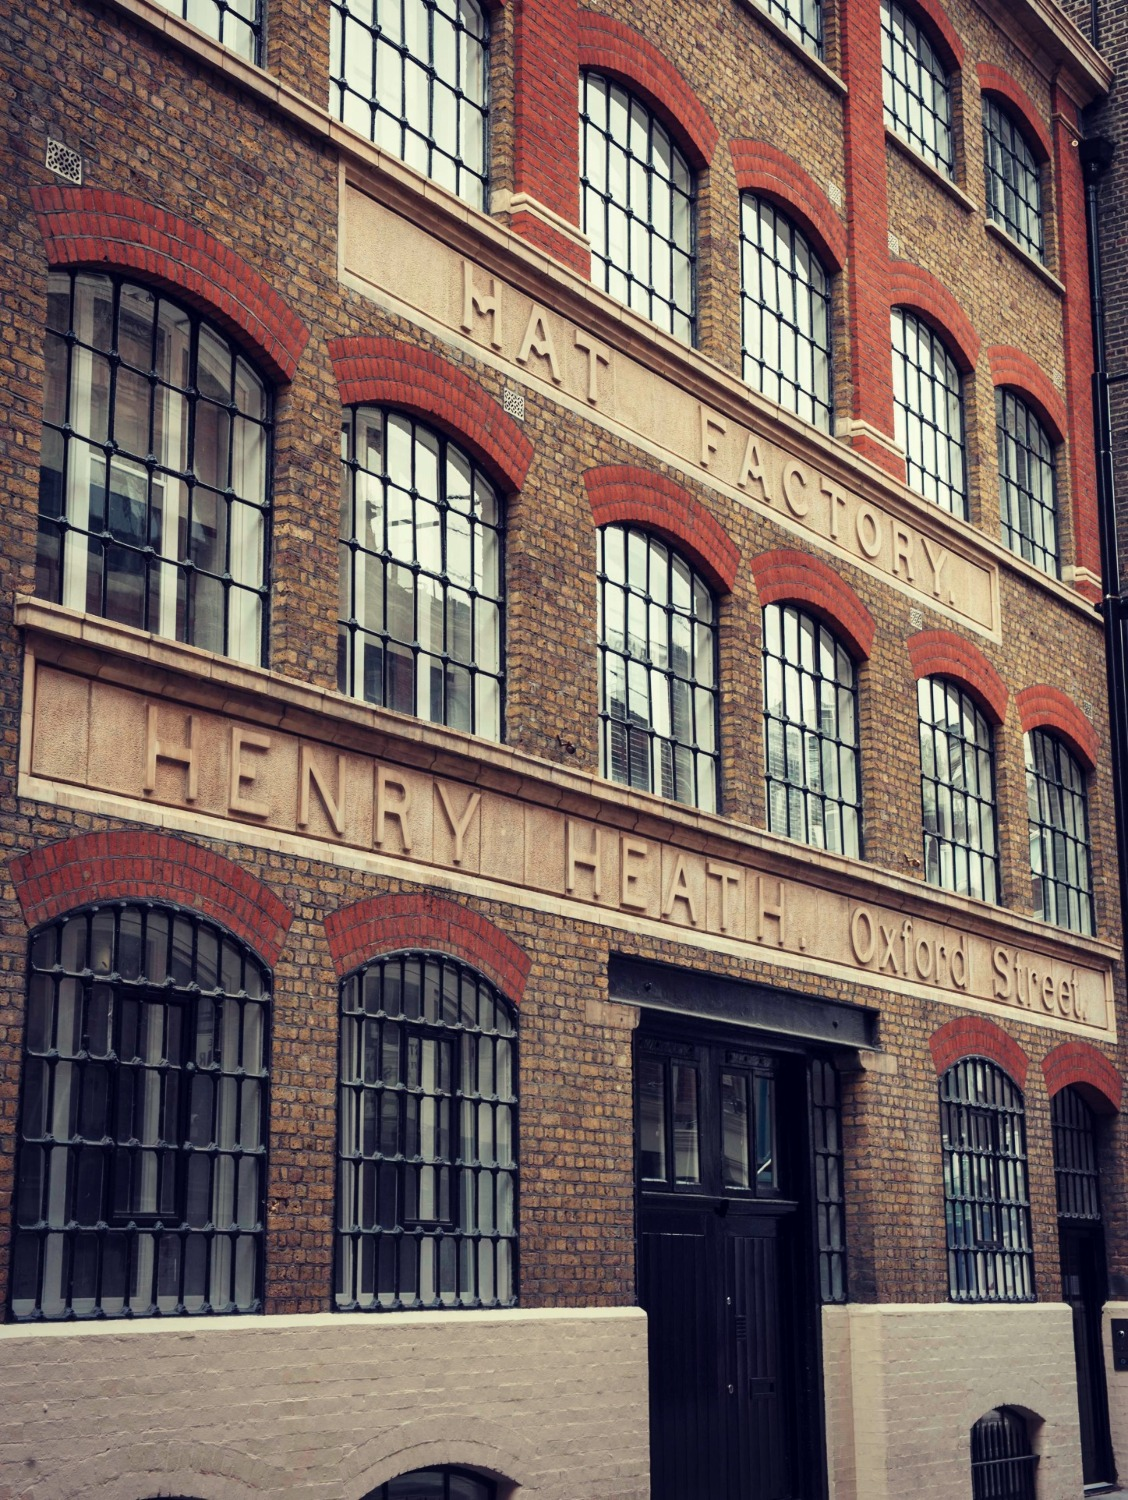 Trying to Locate font on 'Henry Heath' Building